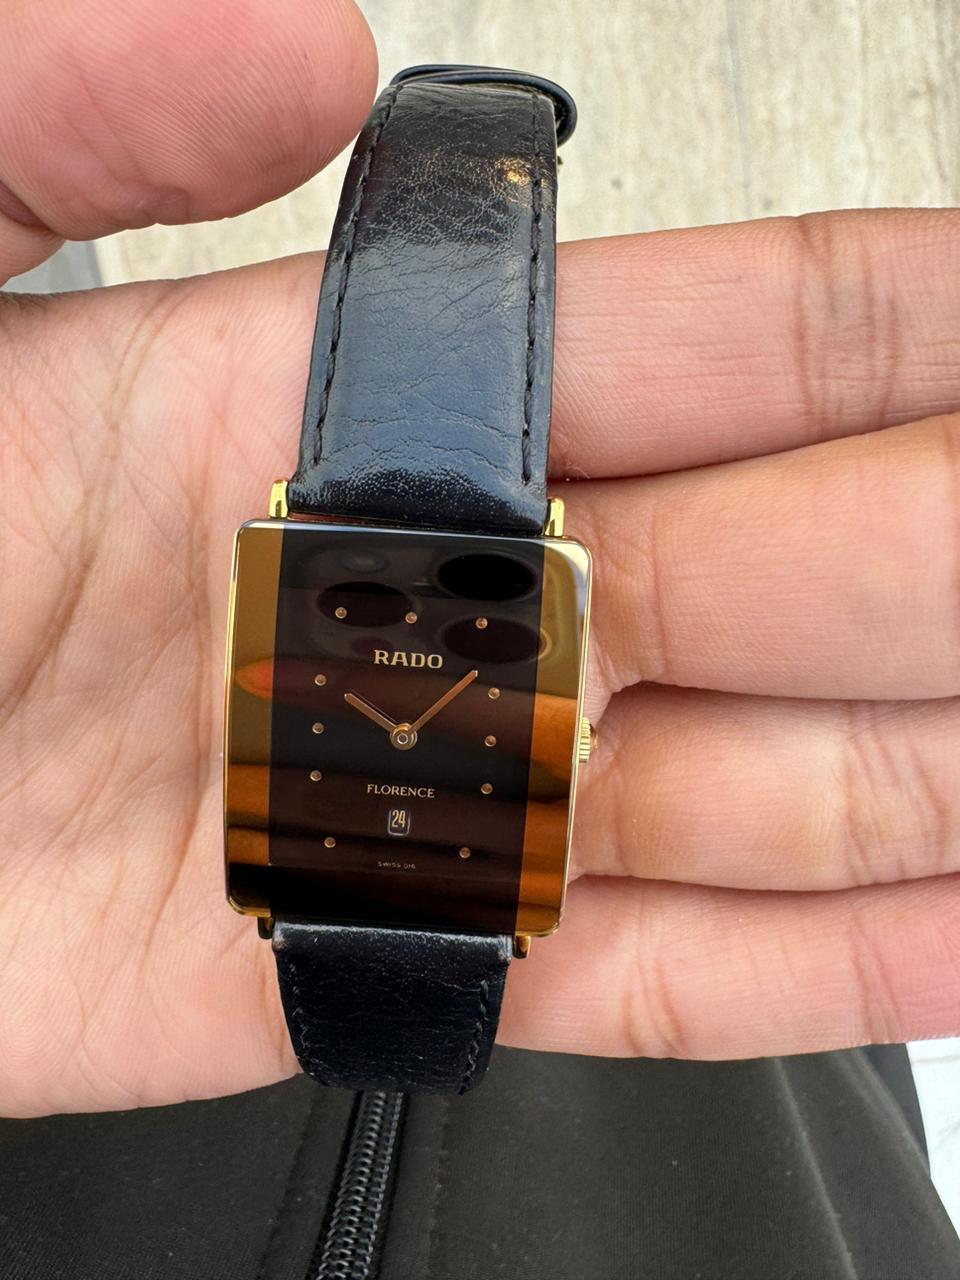 Rado Florence reference 1603670 2 Wristwatch In Good Condition For Sale In Toronto, CA